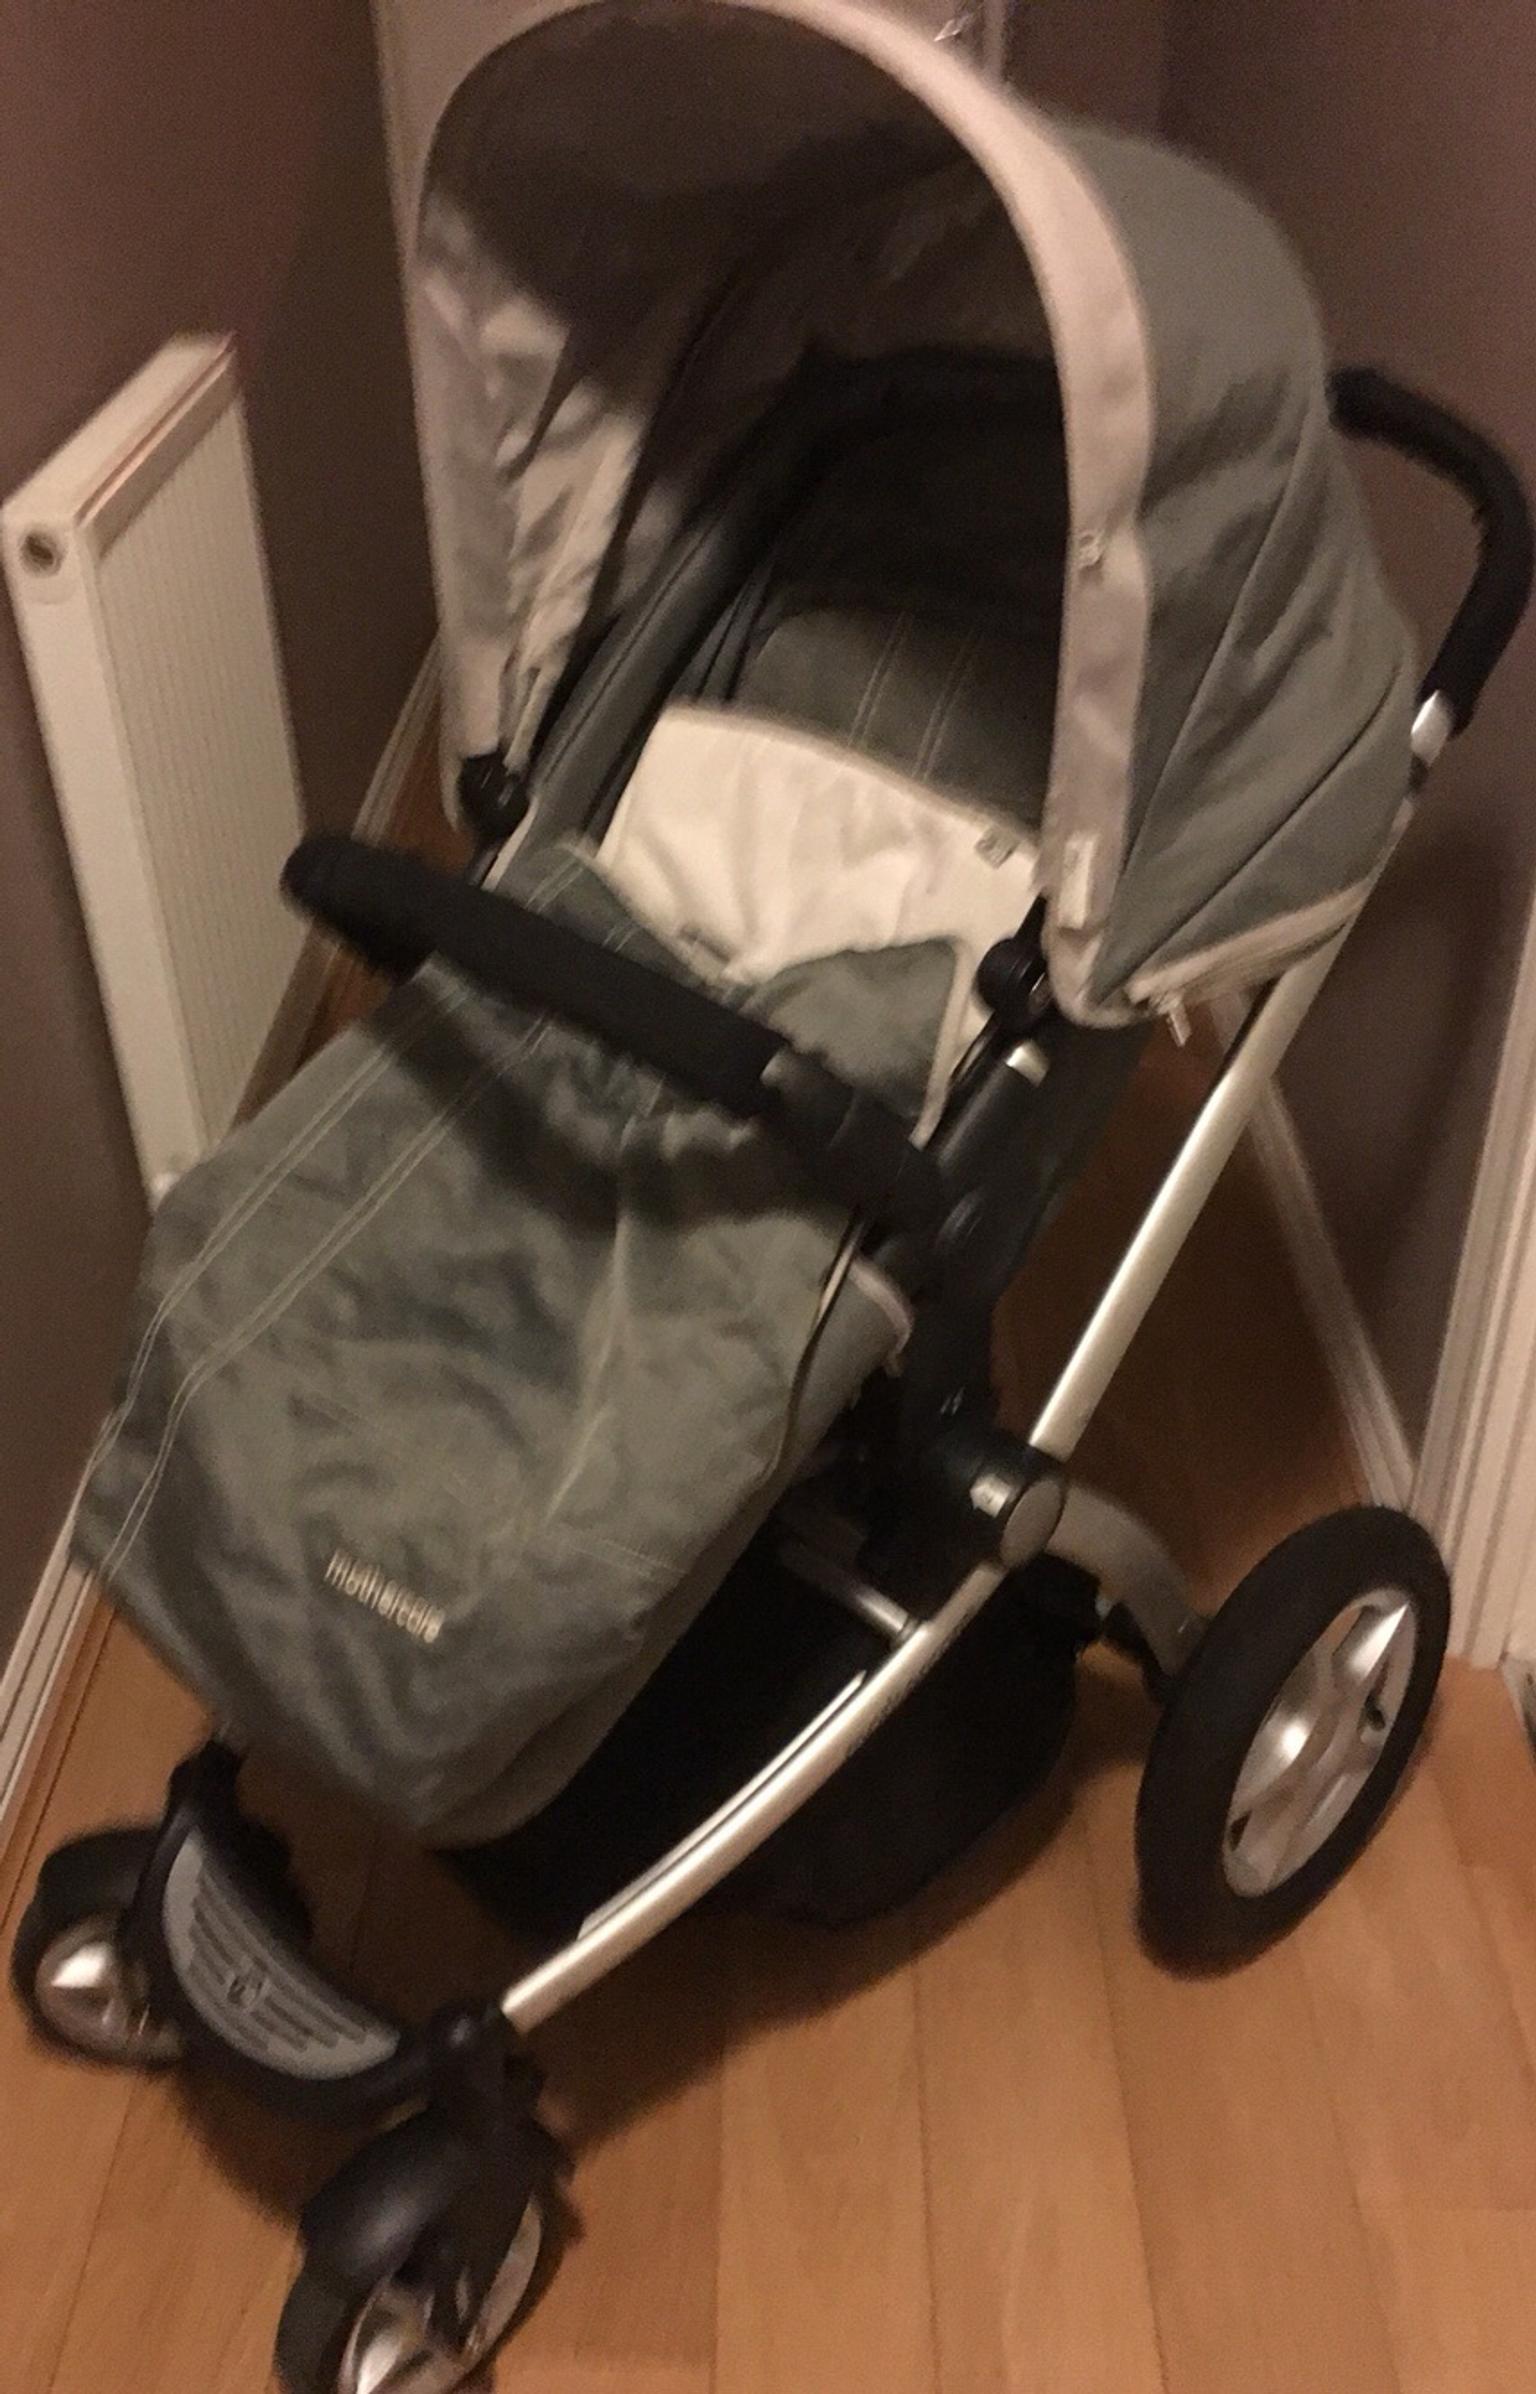 mothercare my4 pushchair